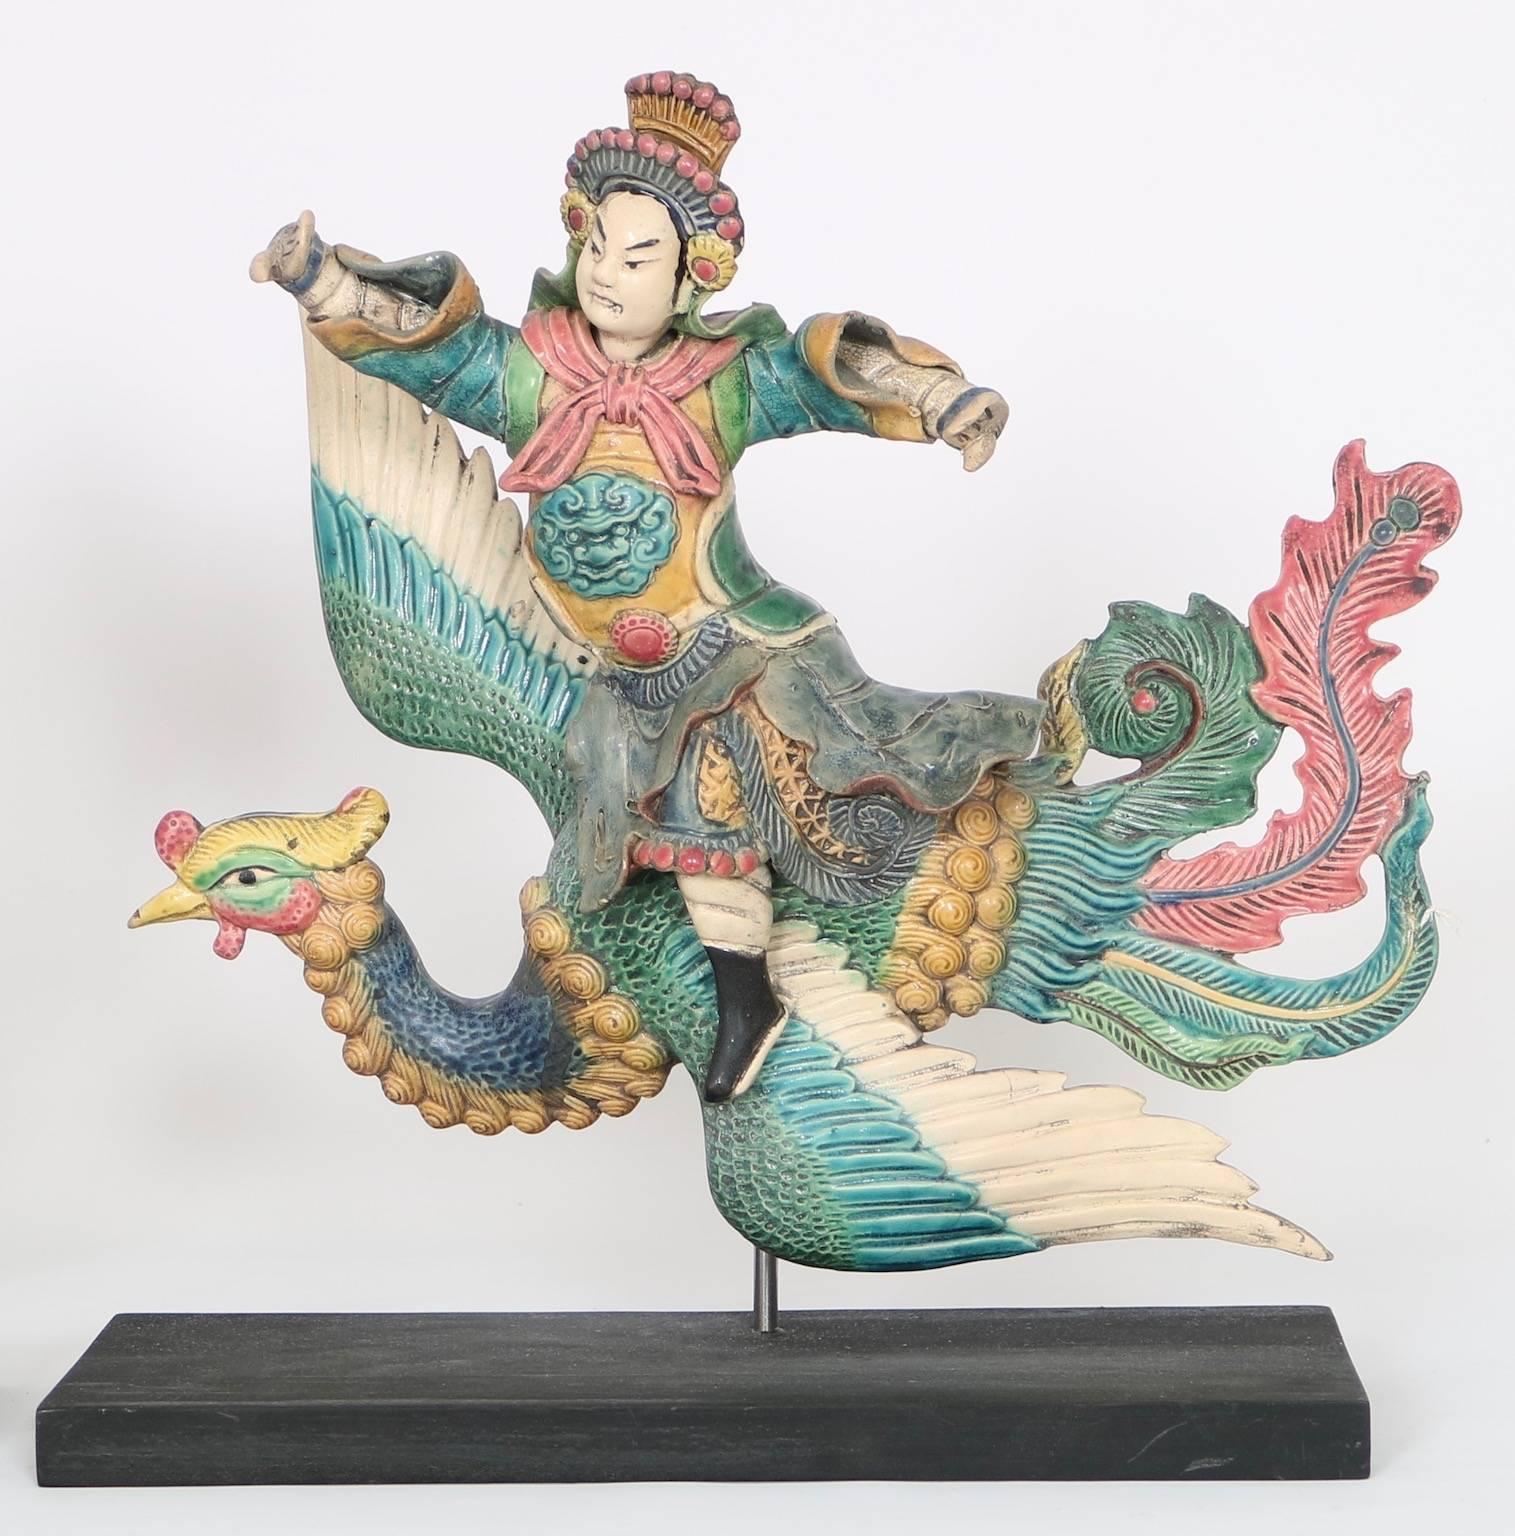 Matching pair of antique early 20th century Chinese roof tiles, crafted of glazed ceramic, depicting warrior characters astride phoenixes riding on the wind, mounted on ebonized wood bases. Excellent condition, wear consistent with age.

110536